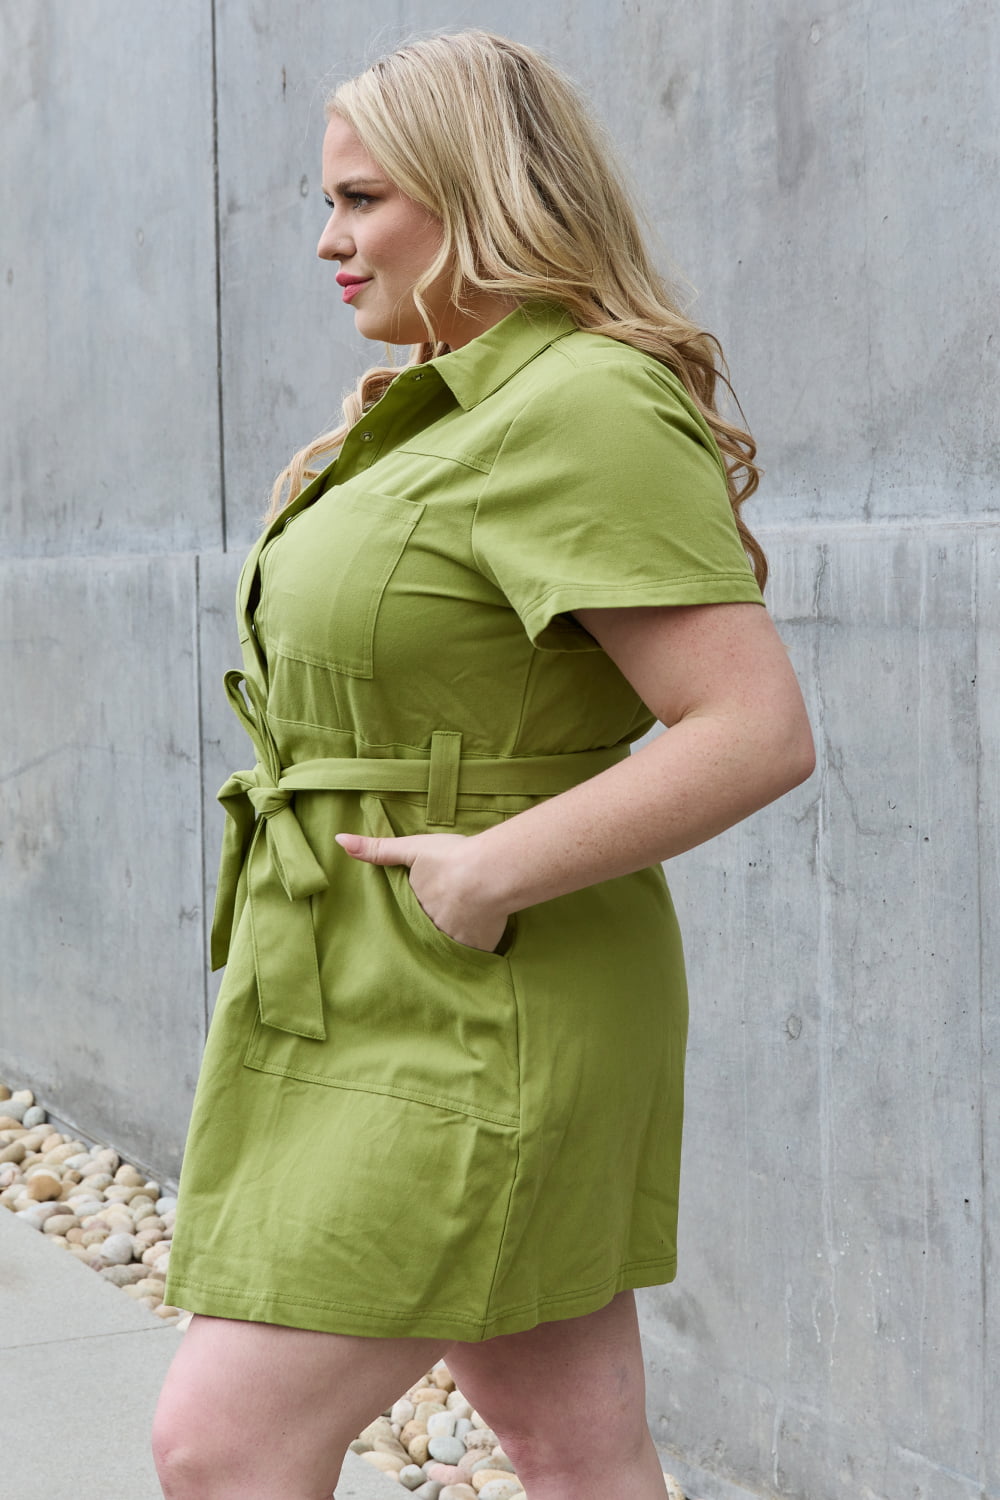 JADE BY JANE Stick With Me Button Down Dress in Lime